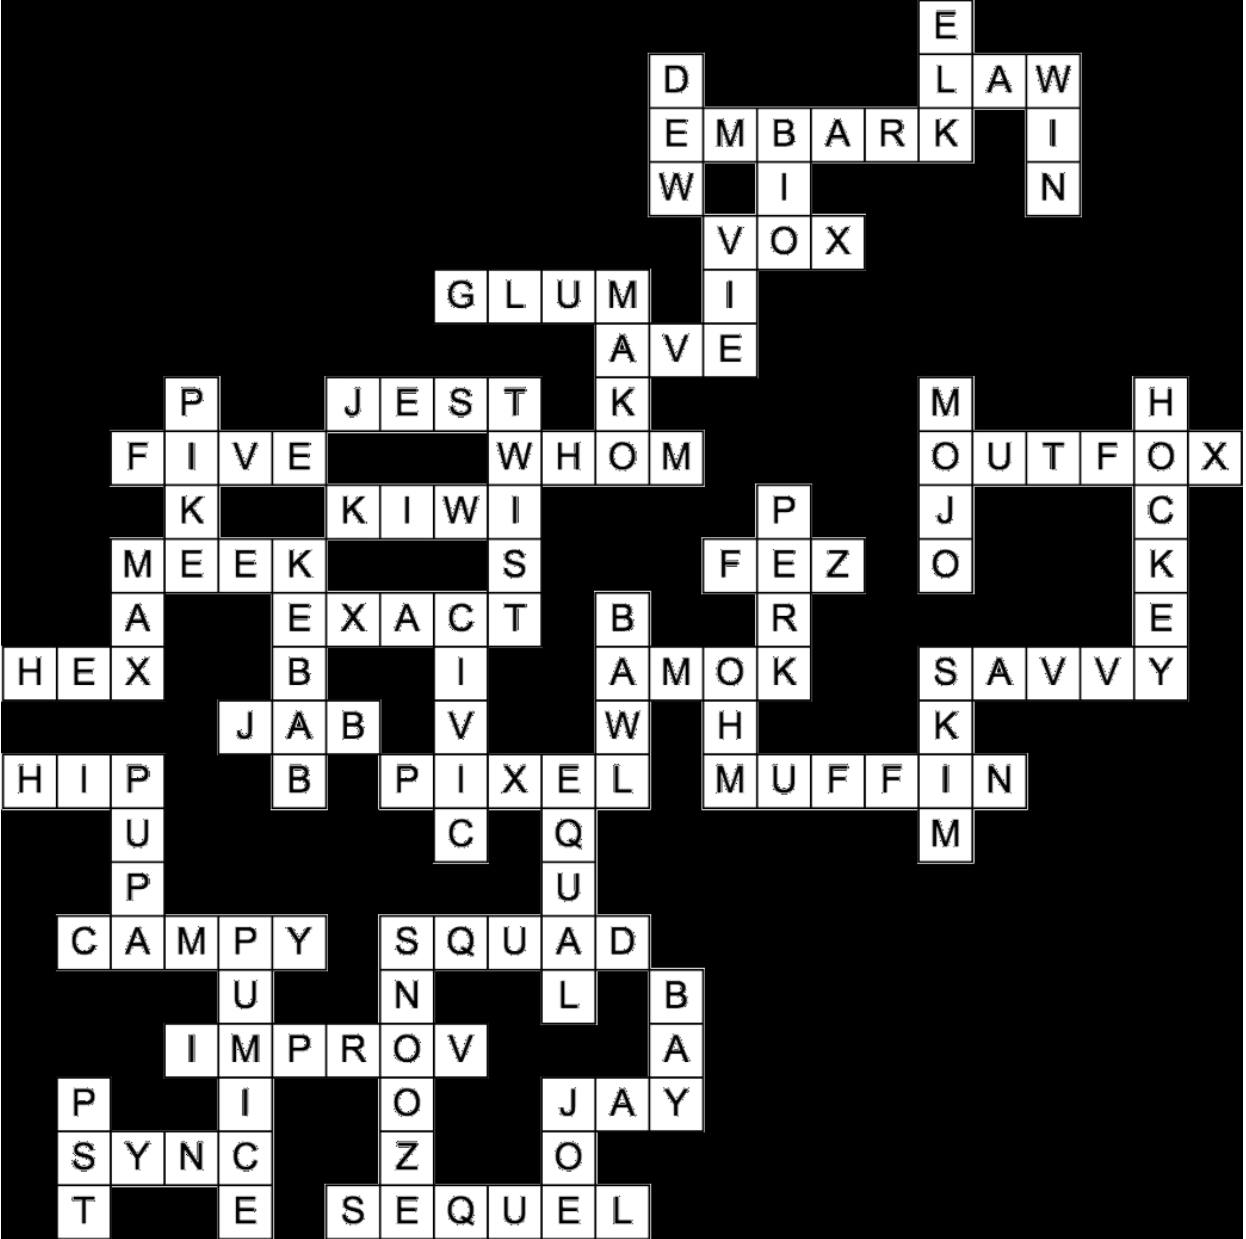 Clarion Crossword: Answers for week 4 DU Clarion